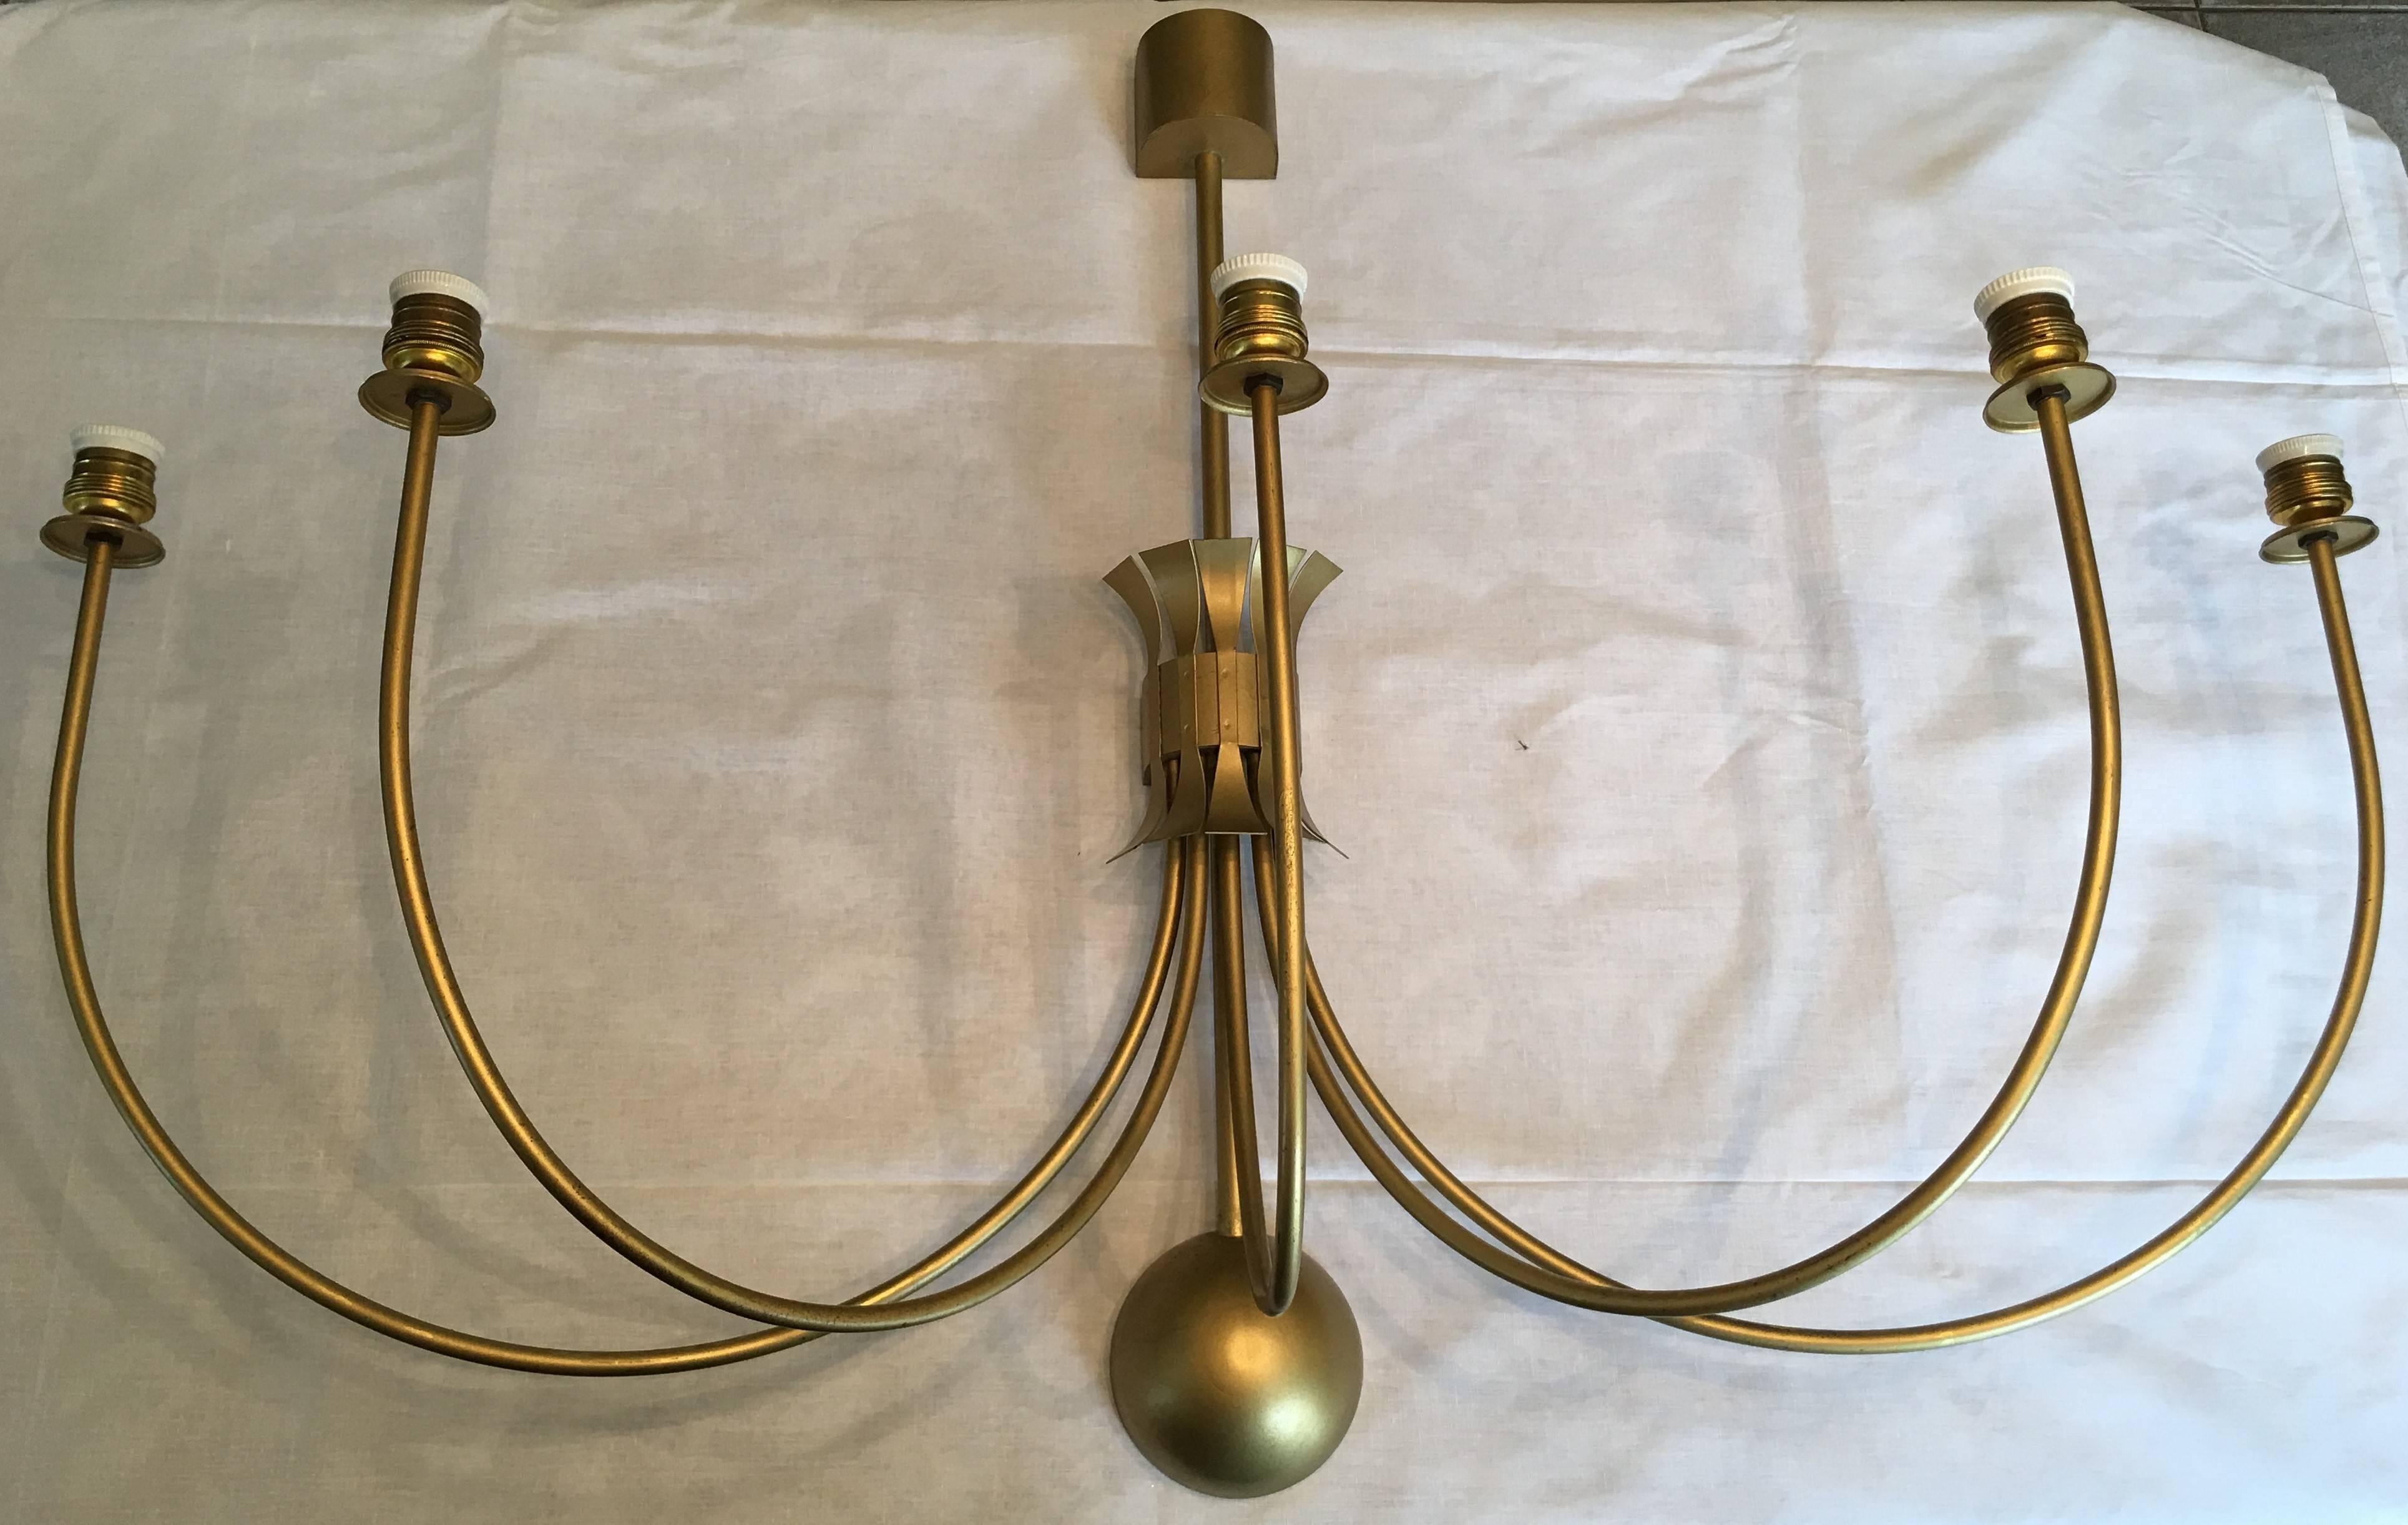 Four Monumental French Theater Sconces, Five Gilt Metal Curved Arms - 1950s For Sale 3